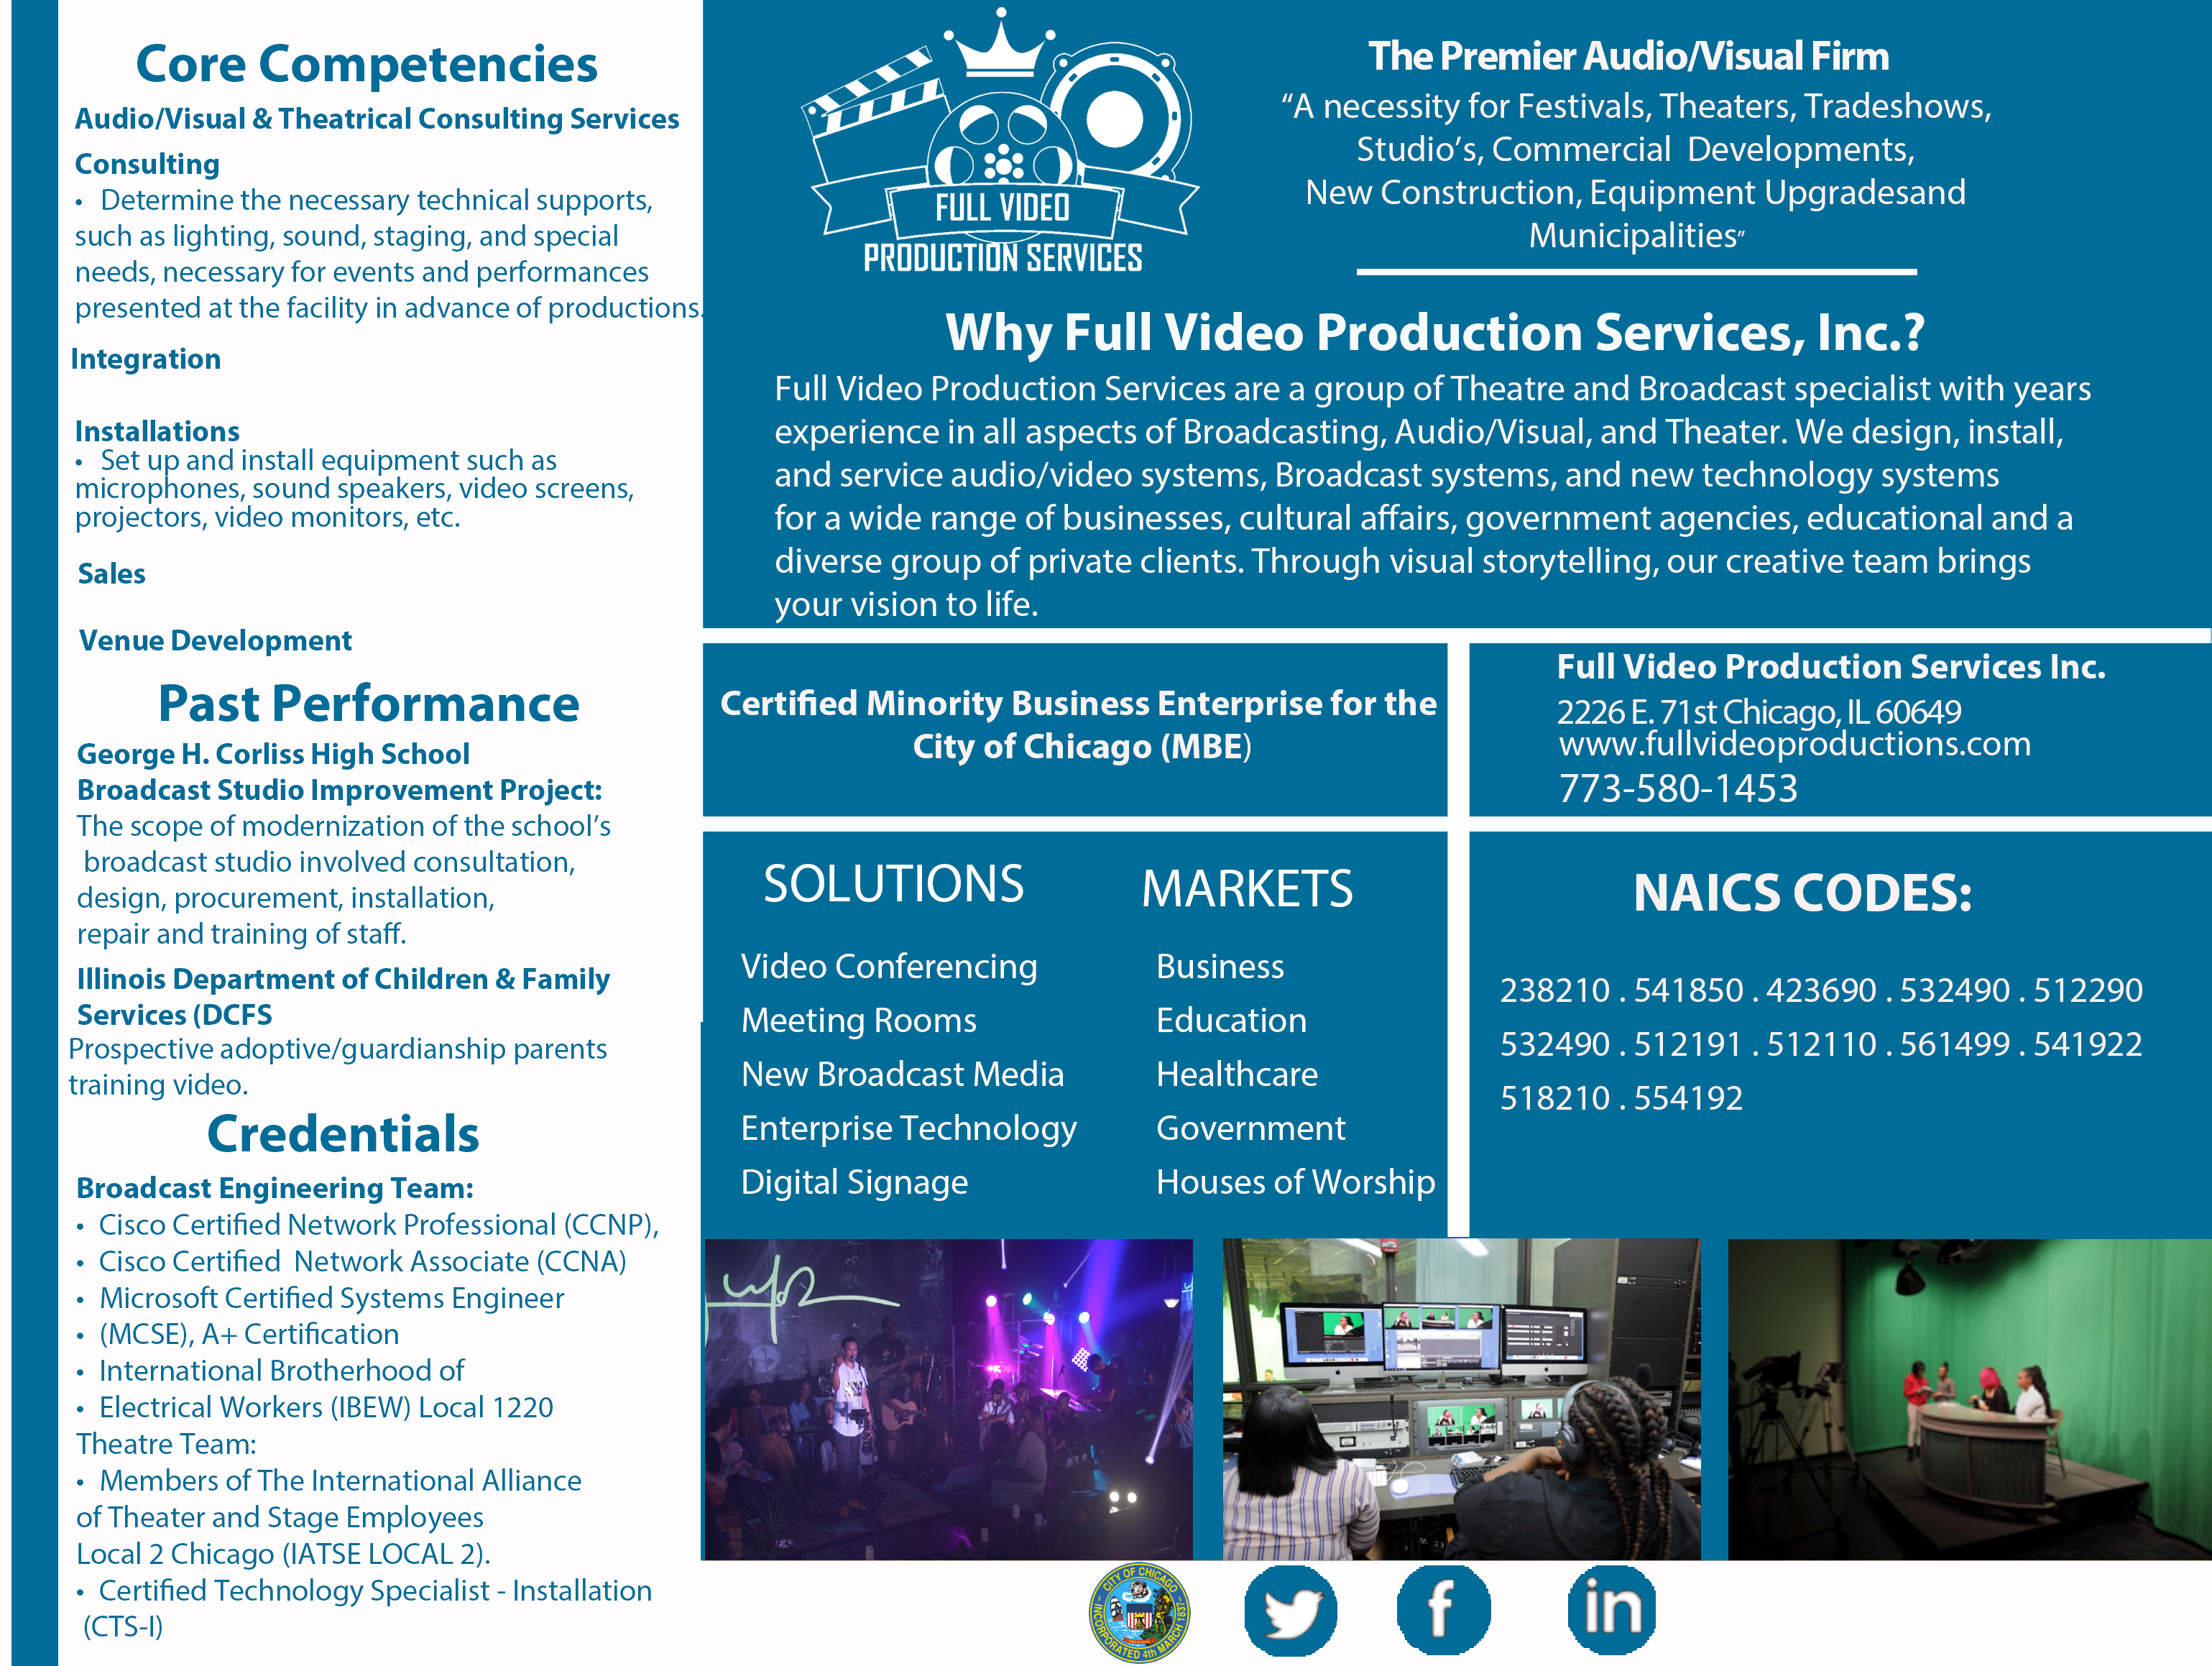 Video Production Services - Group Travel Network